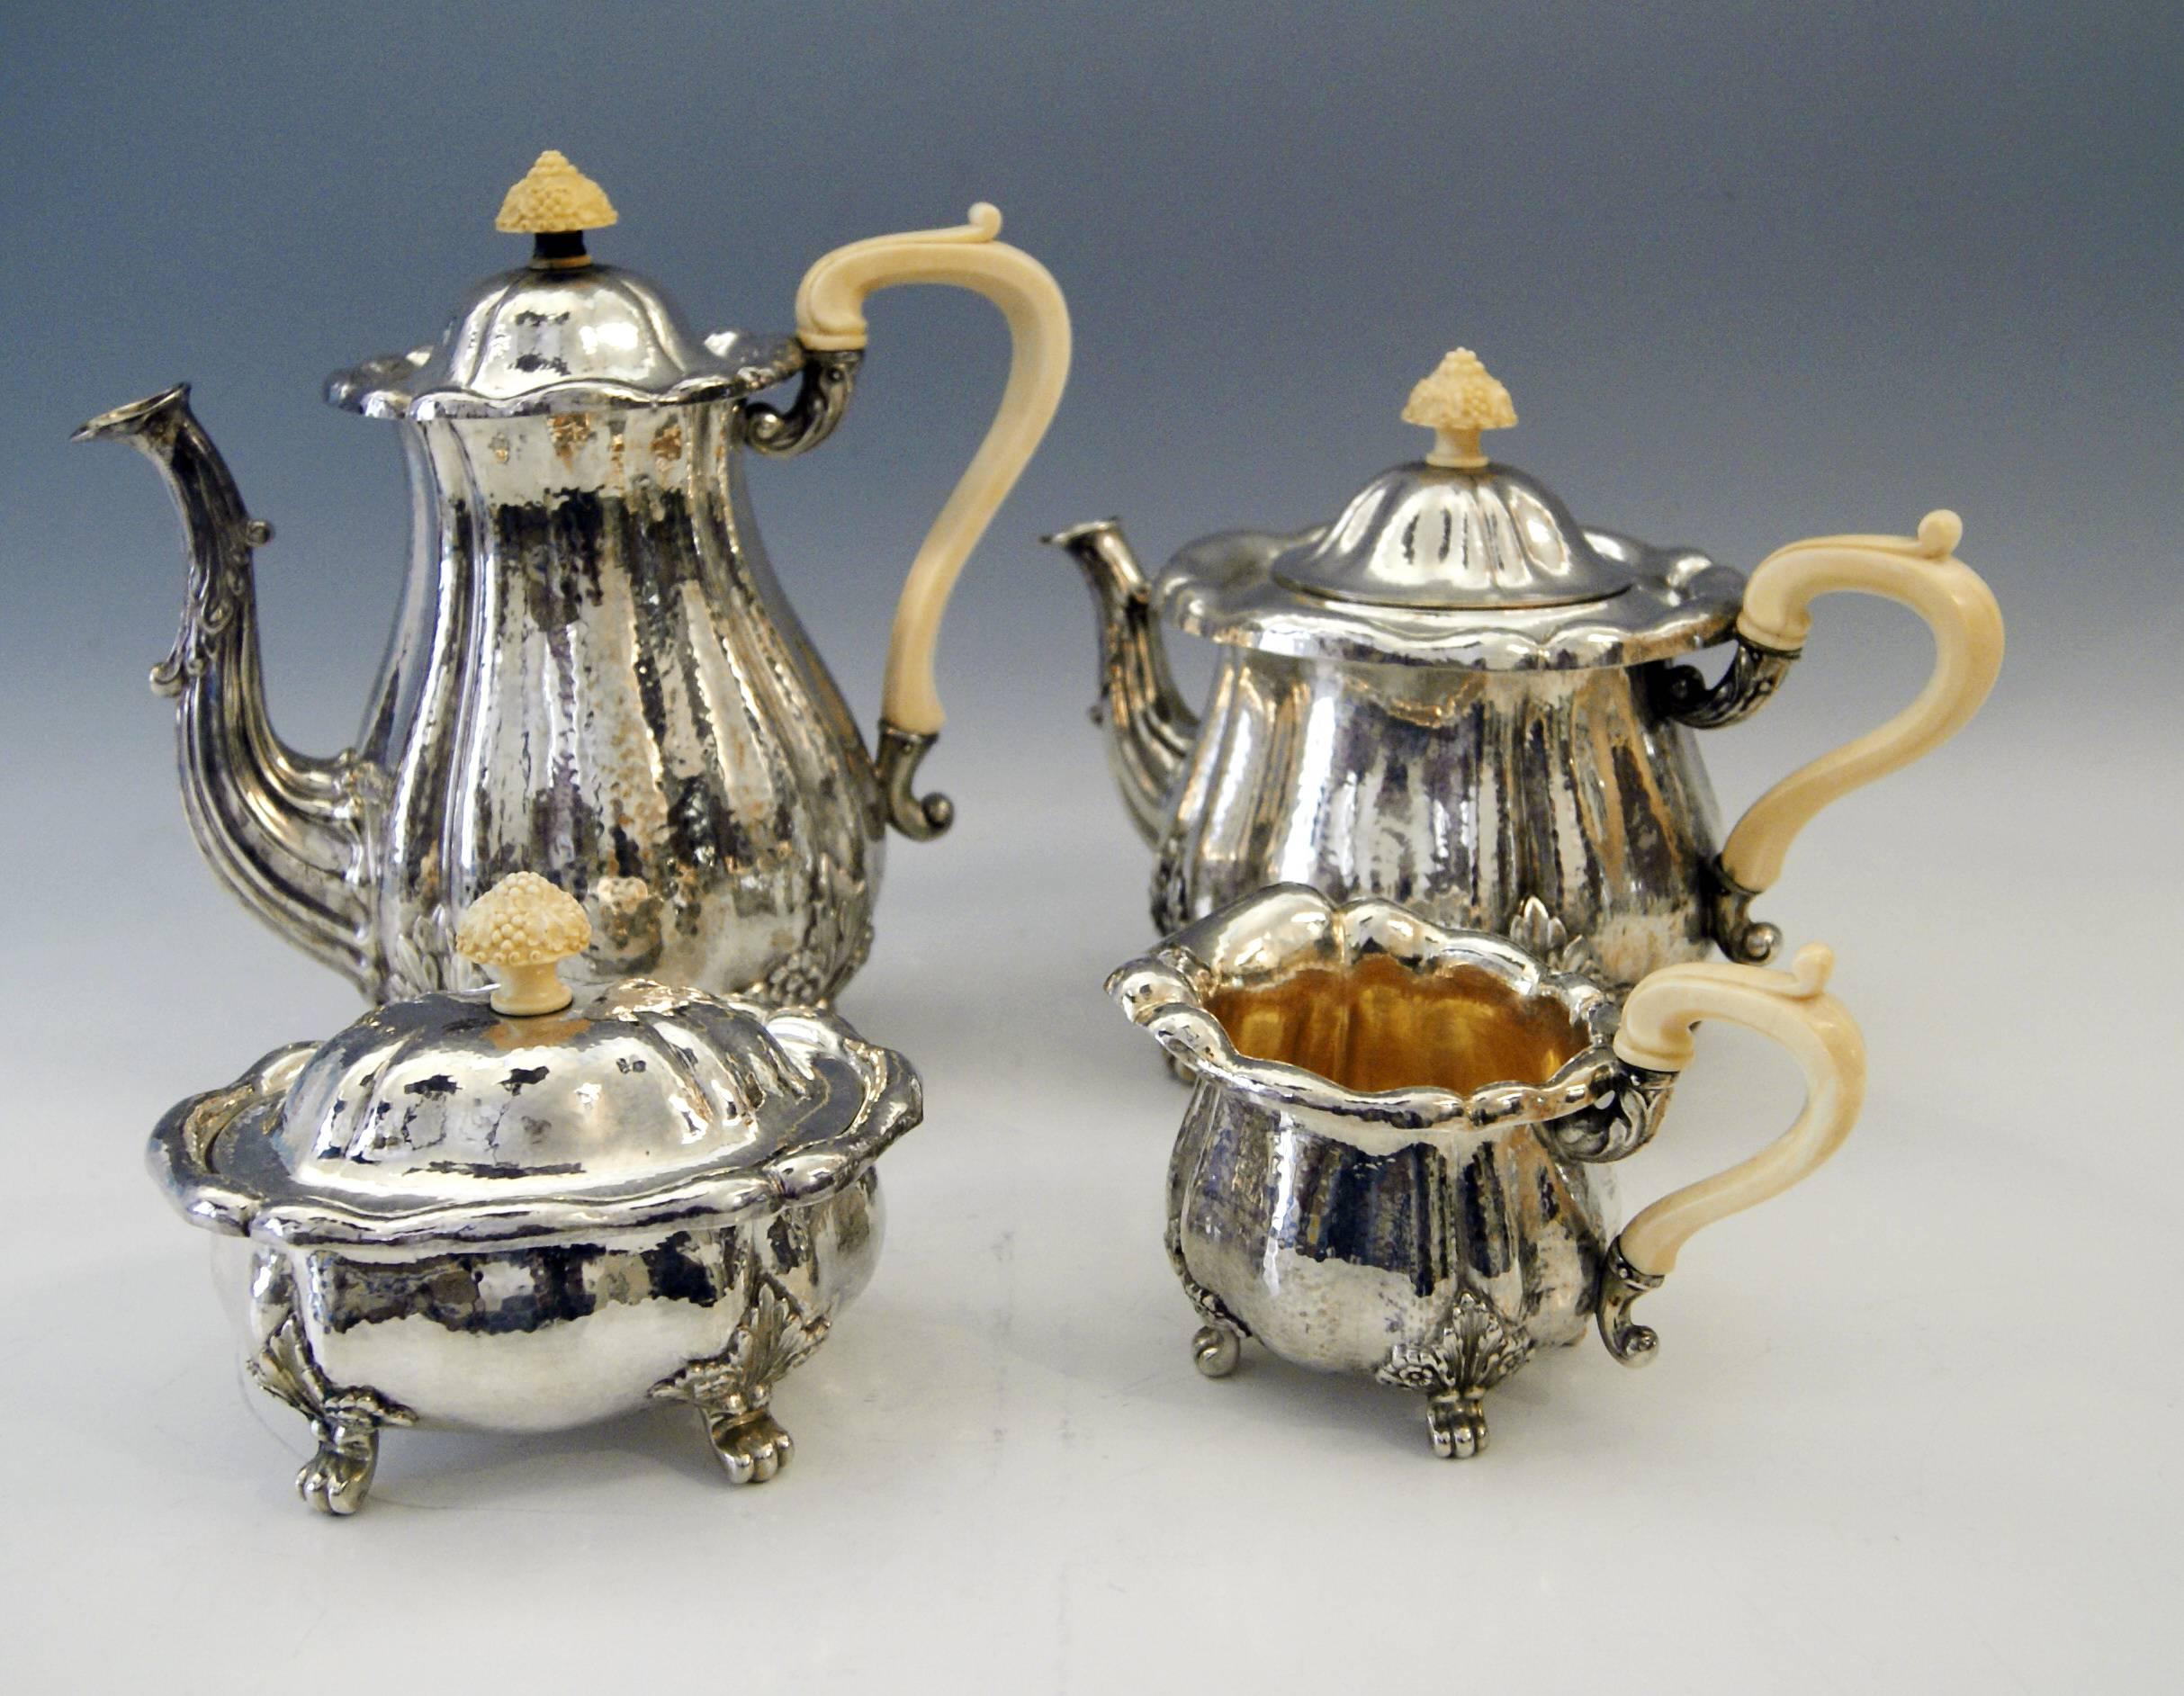 Silver stunning coffee / tea set in Baroque Style, Germany.
Manufactured by J.D. Schleissner & Sons (Hanau), made circa 1890.

 This set consists of various parts:
Coffee pot height: 9.64 inches (24.5 cm).
Tea pot height: 7.28 inches (18.5